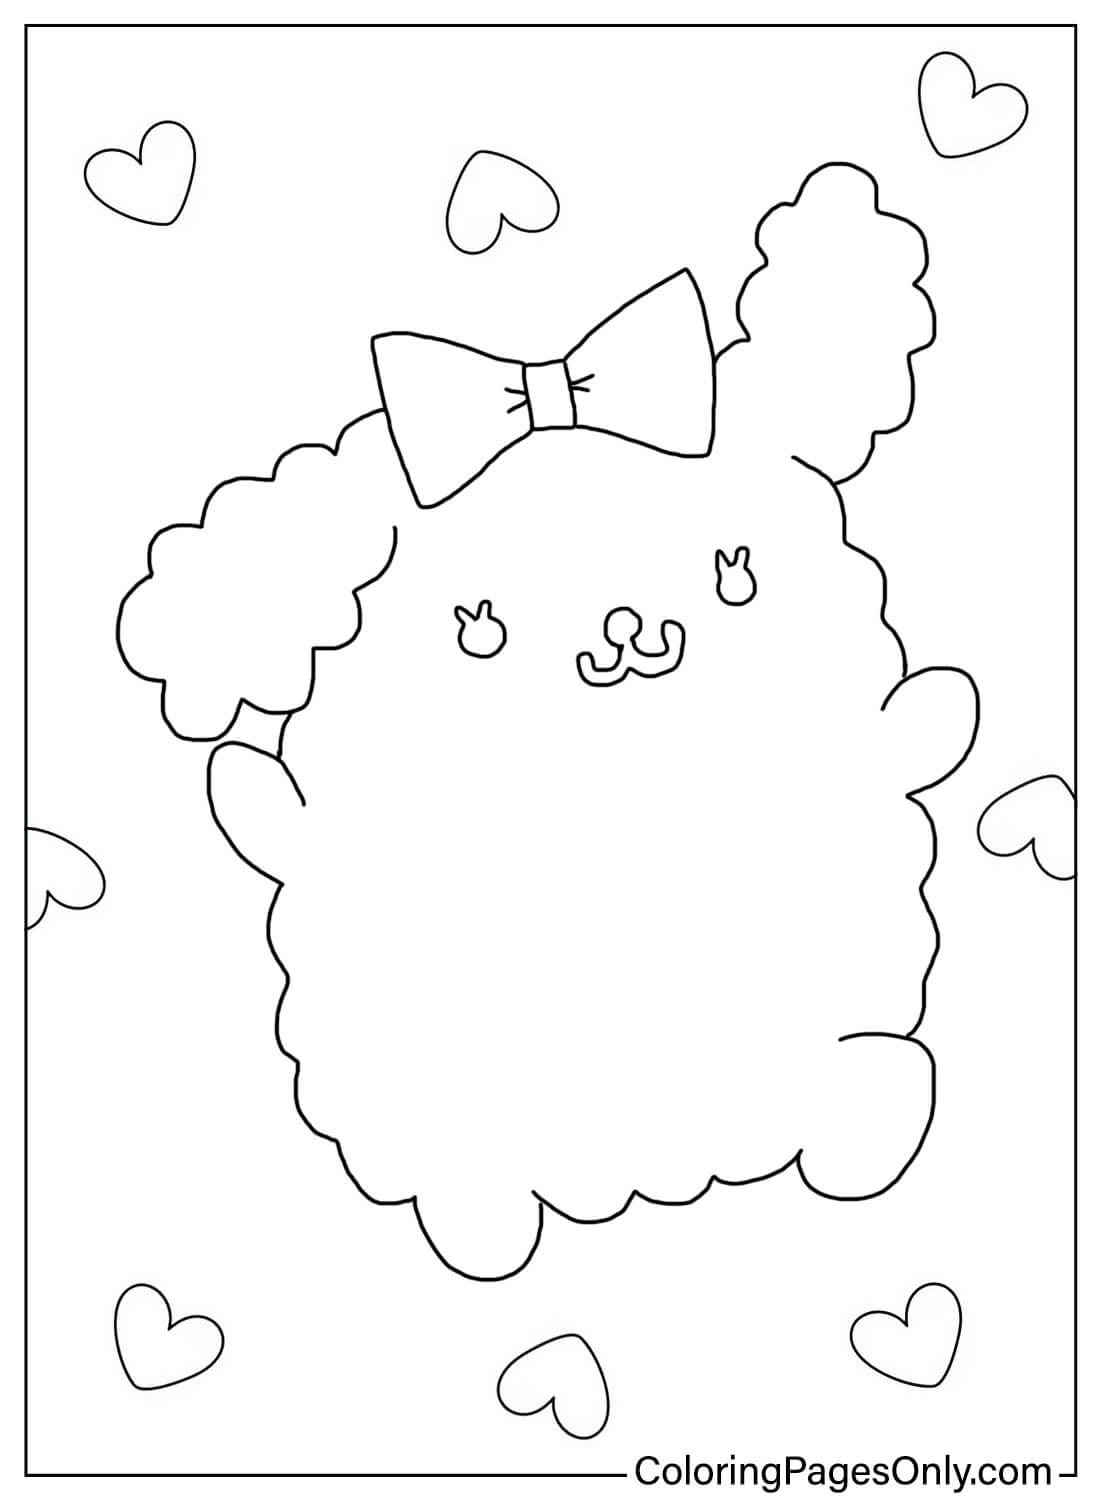 Macaroon Sanrio Coloring Page Free from Macaroon Sanrio